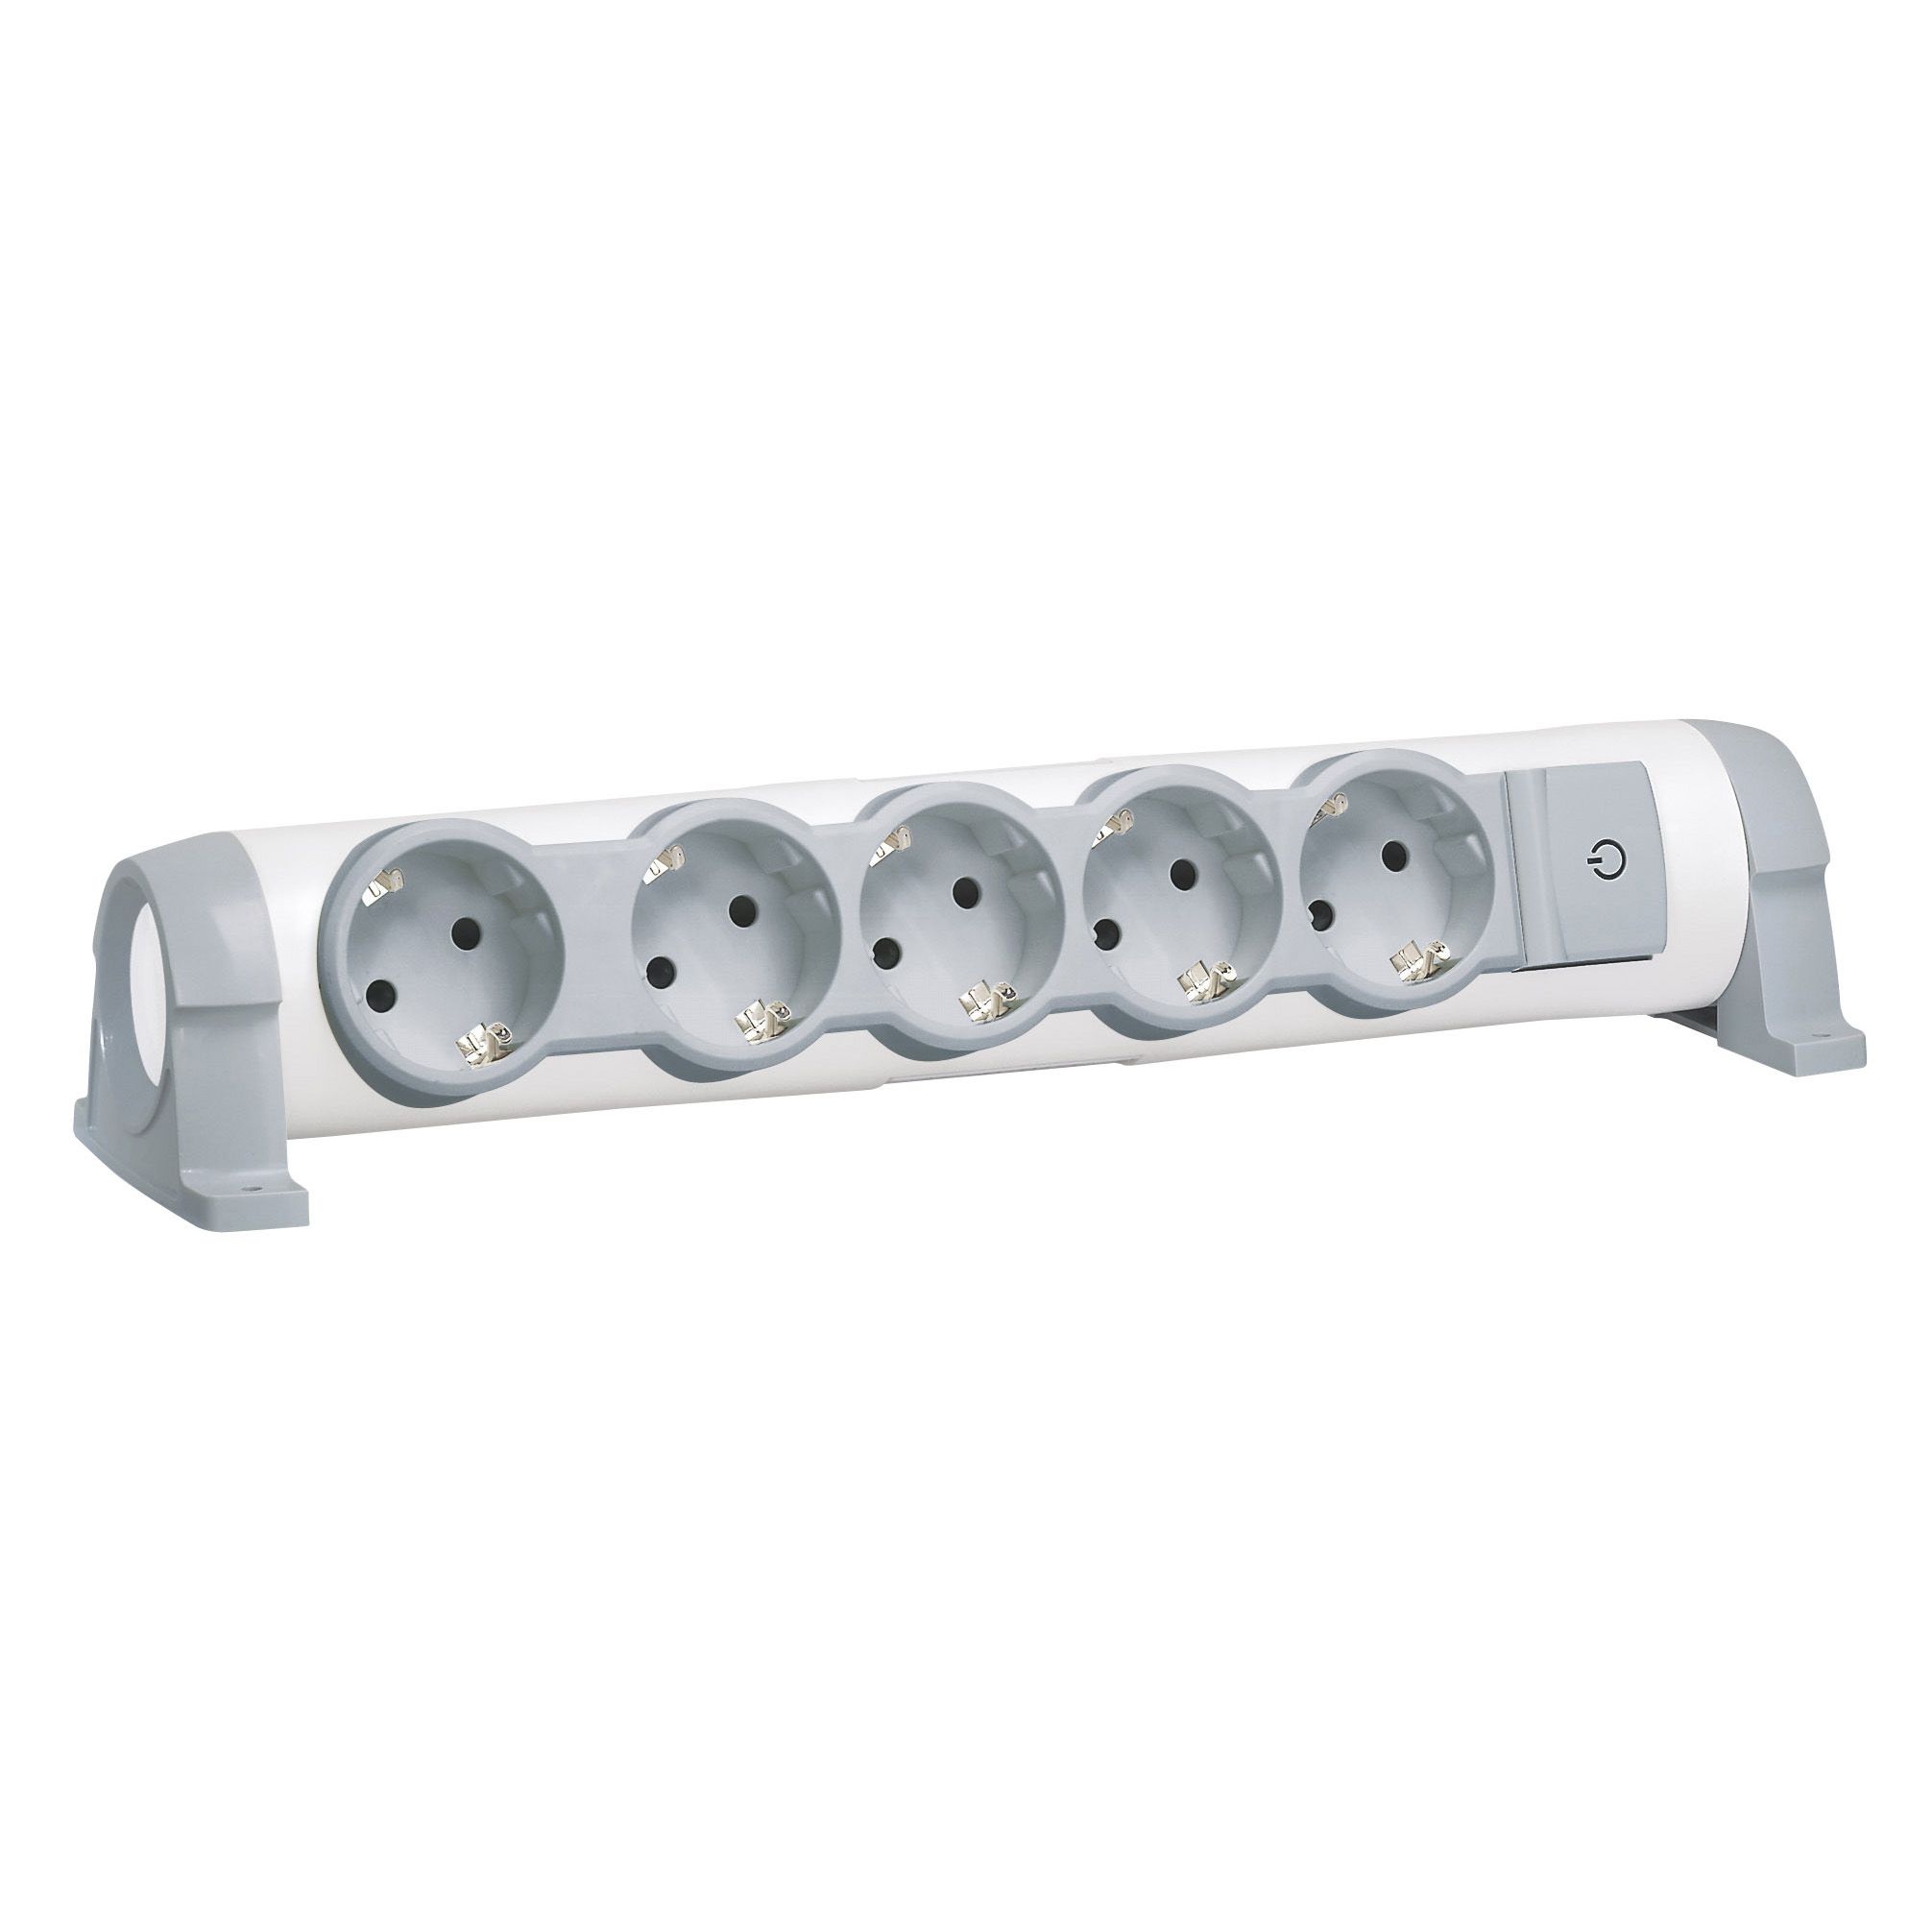 Multi-outlet extension for comfort - 5x2P+E orientable - w/o cord